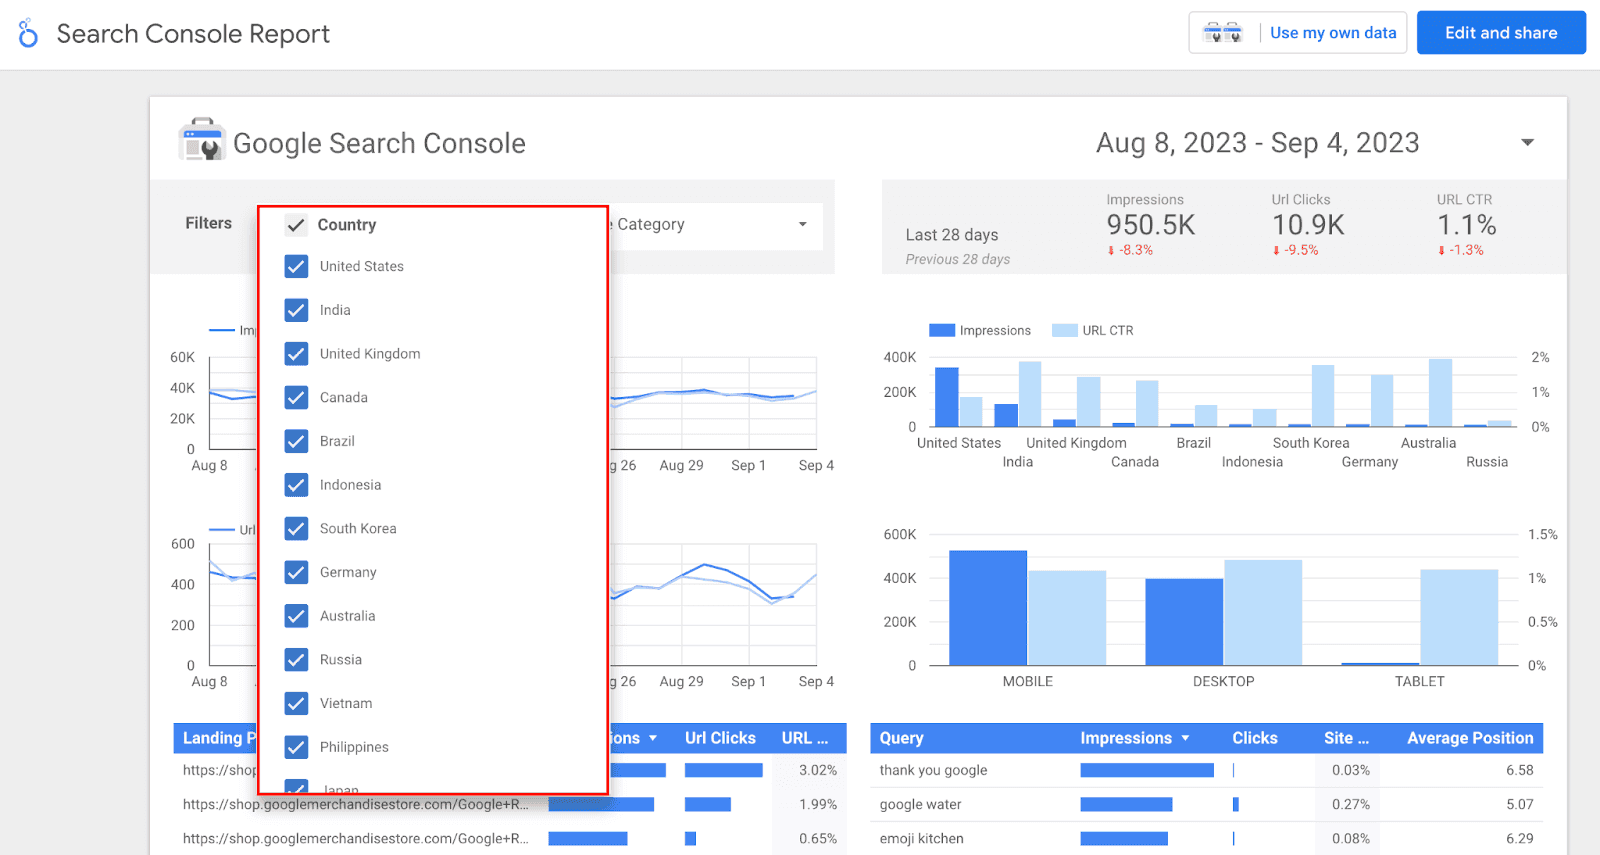 Search Console Report - Country